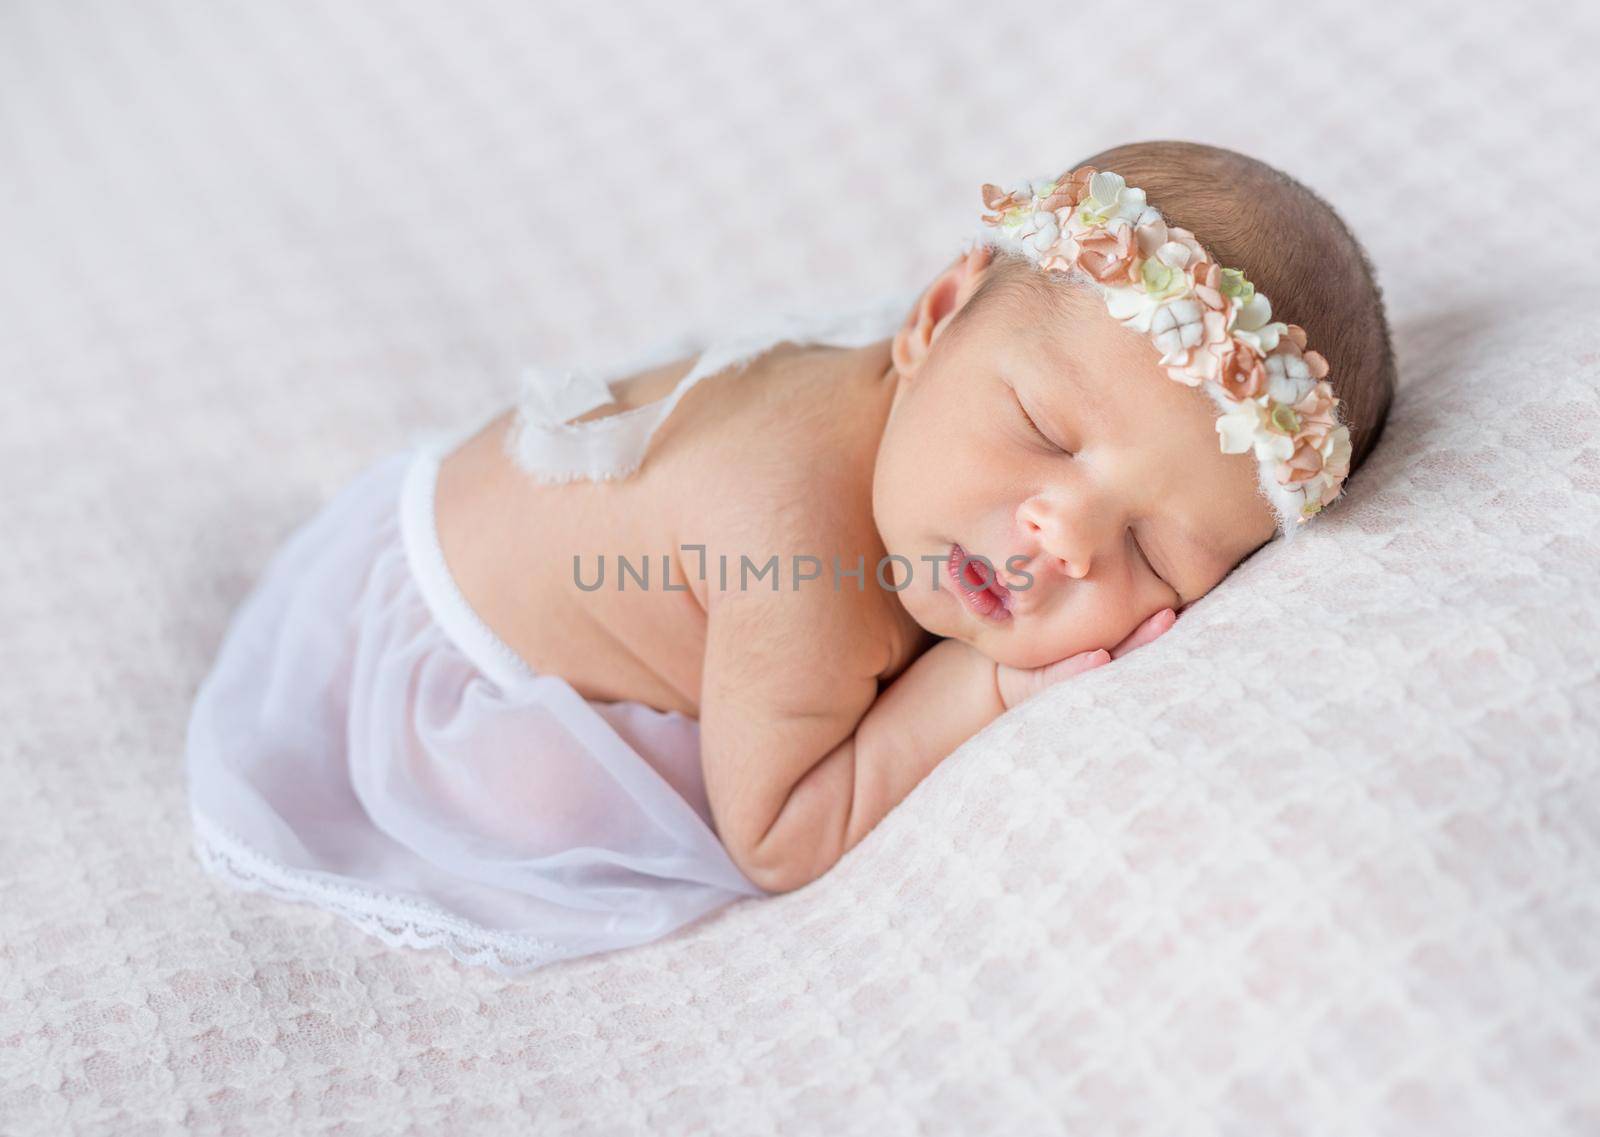 lovely newborn girl with headband sleeping on her stomach and hands under her head, covered with white shawl